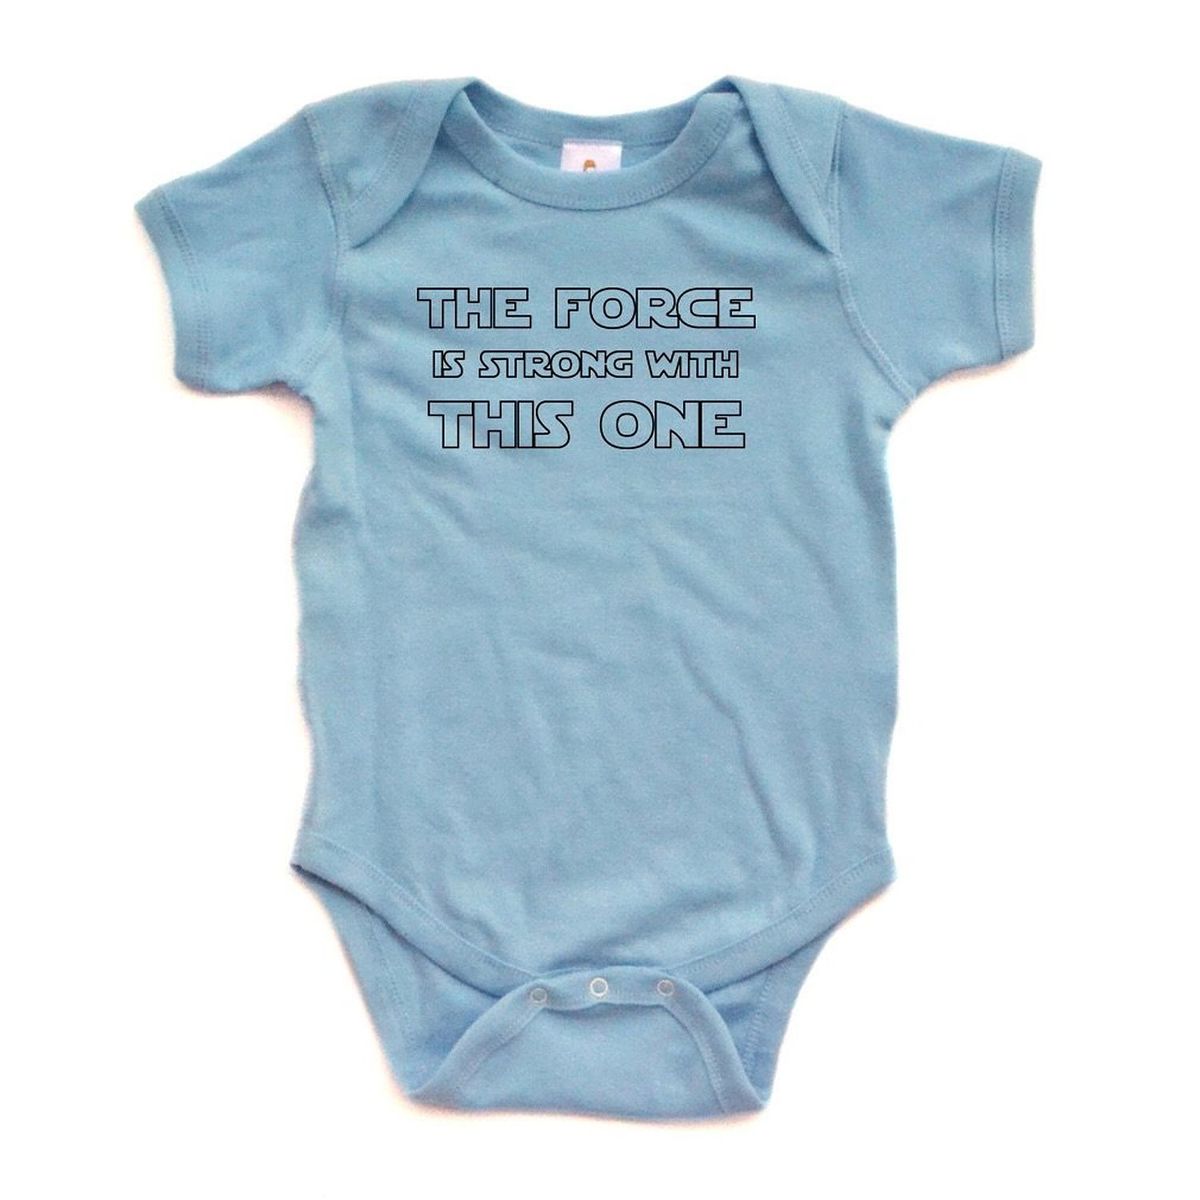 the-force-is-strong-with-this-one onesie